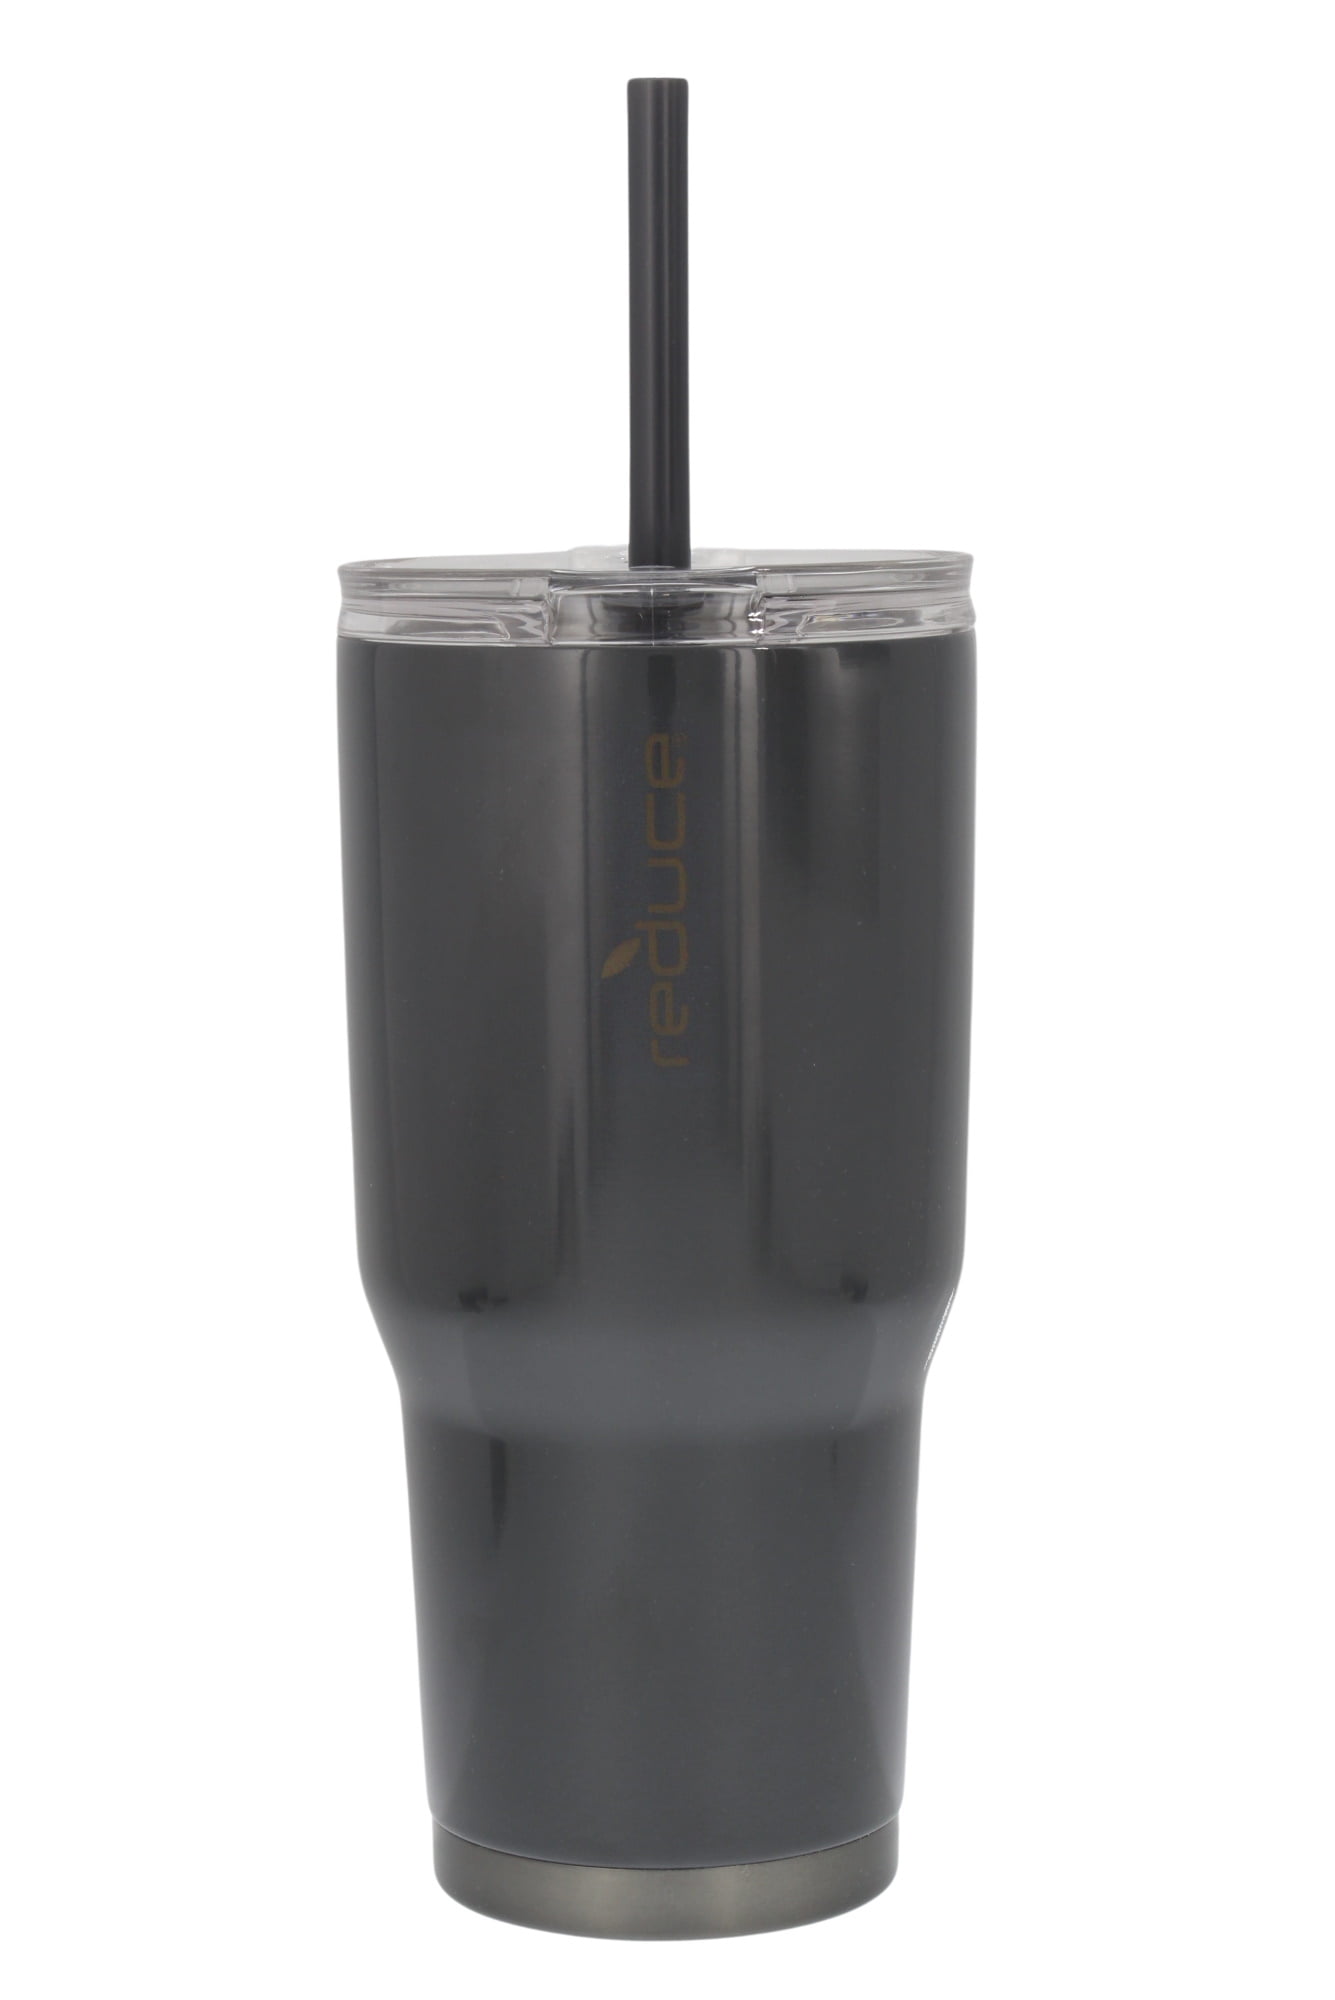 Reduce Cold1 Stainless Steel Insulated Tumbler - Sand - 34 oz